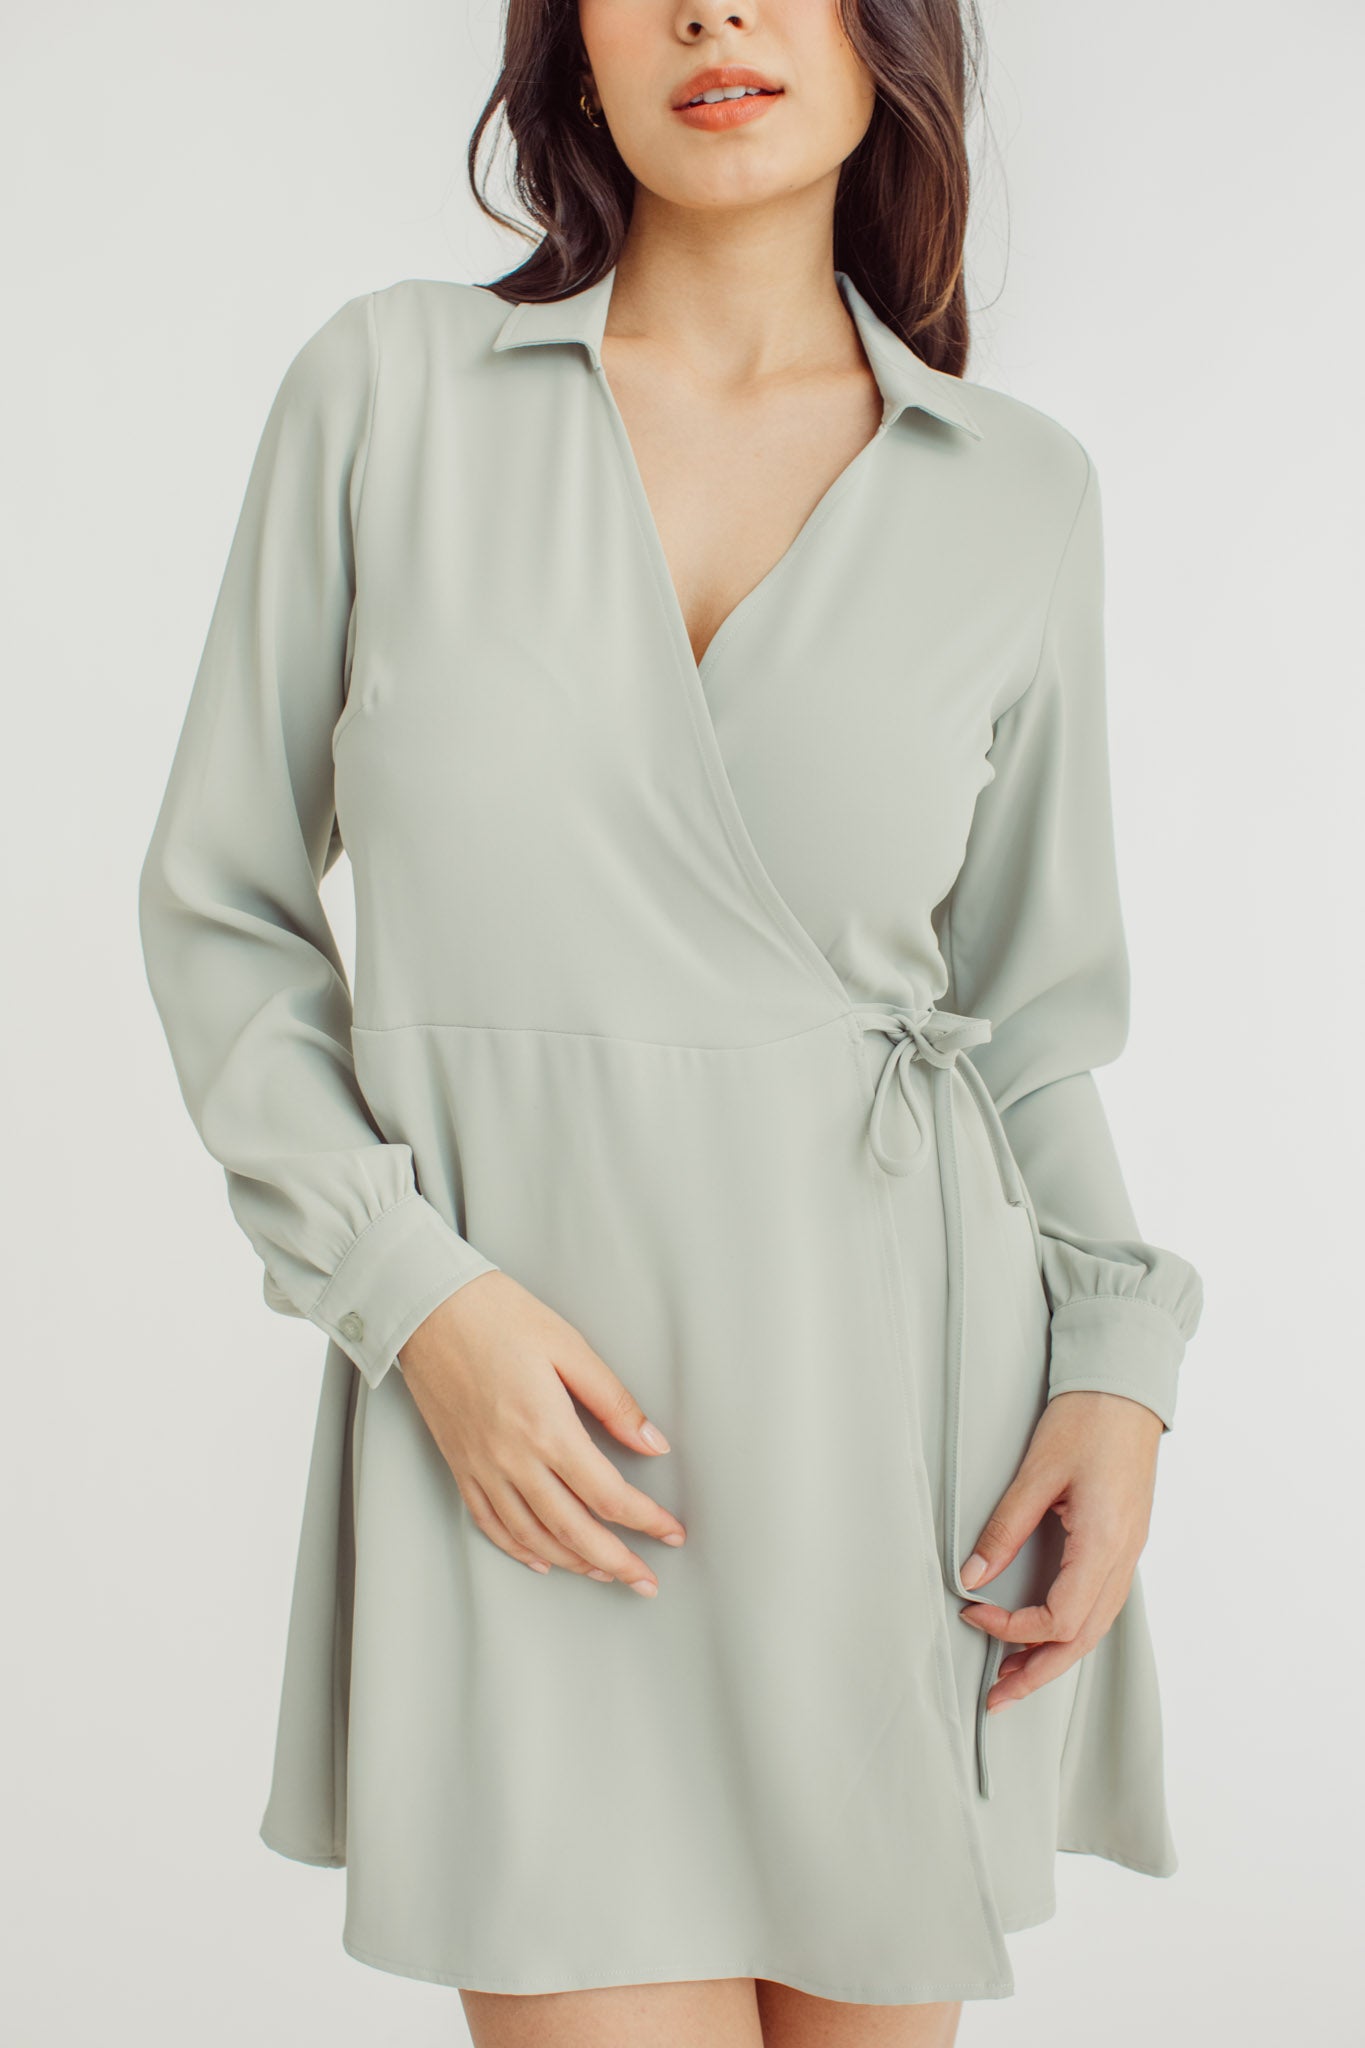 Vianne Sage Green V Neck Wrap Dress with Collar - Mossimo PH